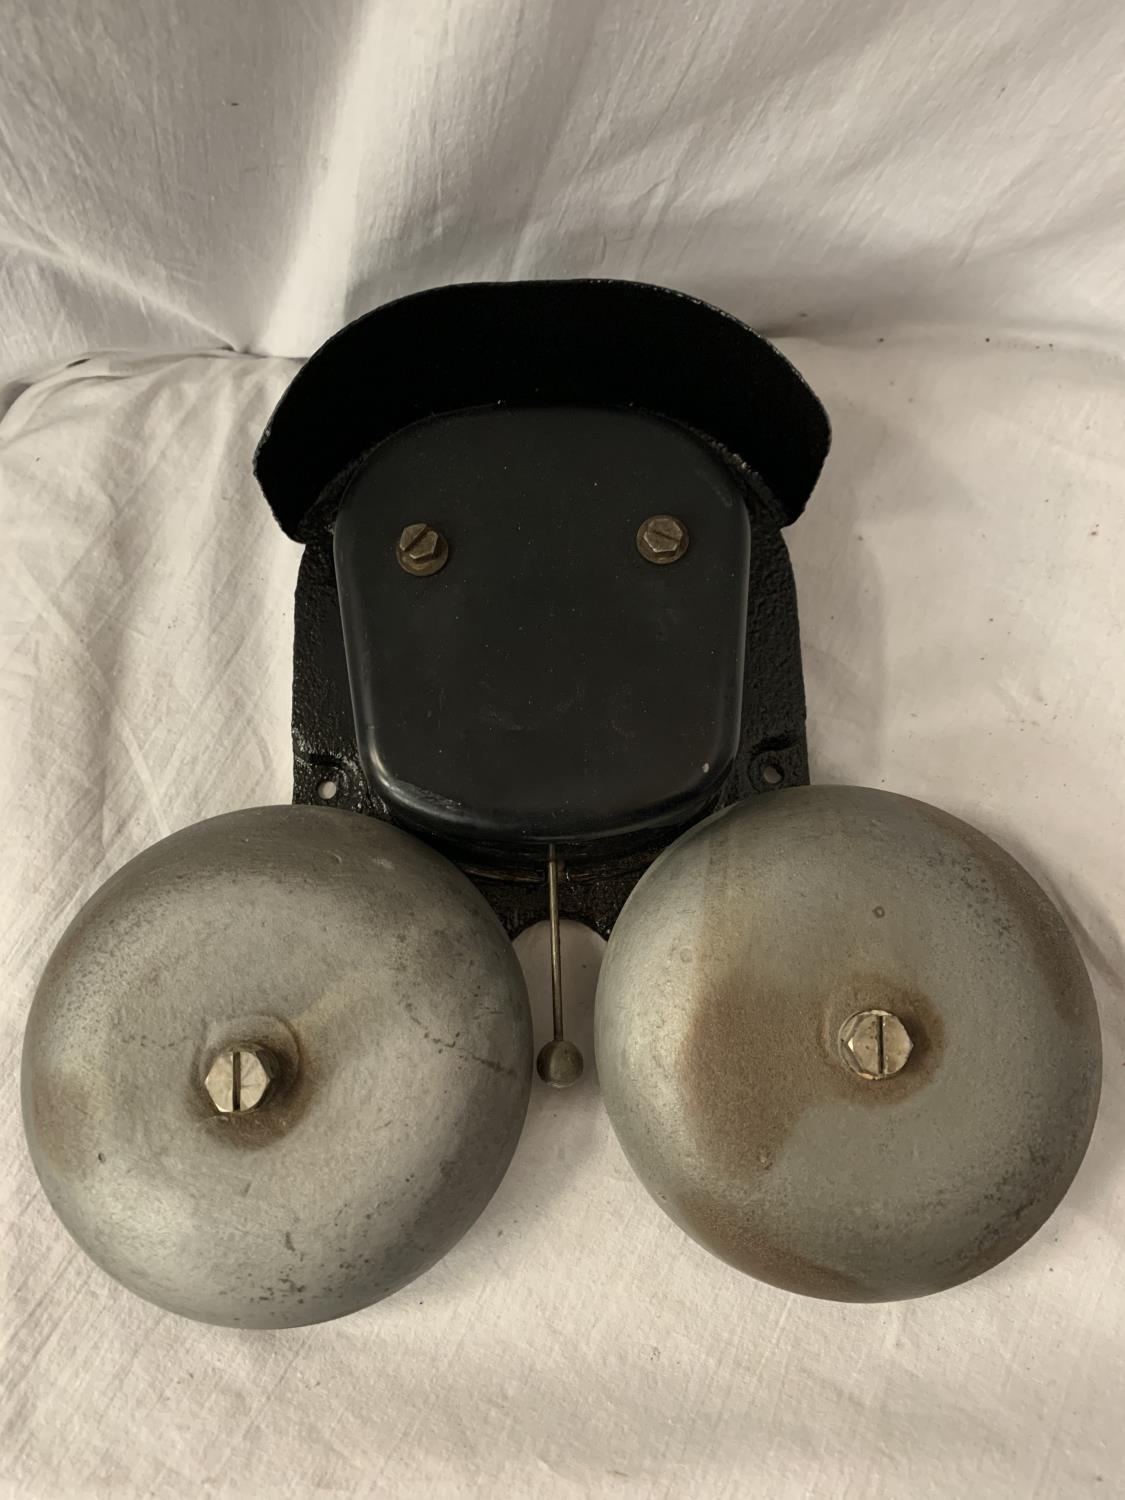 A VINTAGE INDUSTRIAL ELECTRIC ALARM BELL